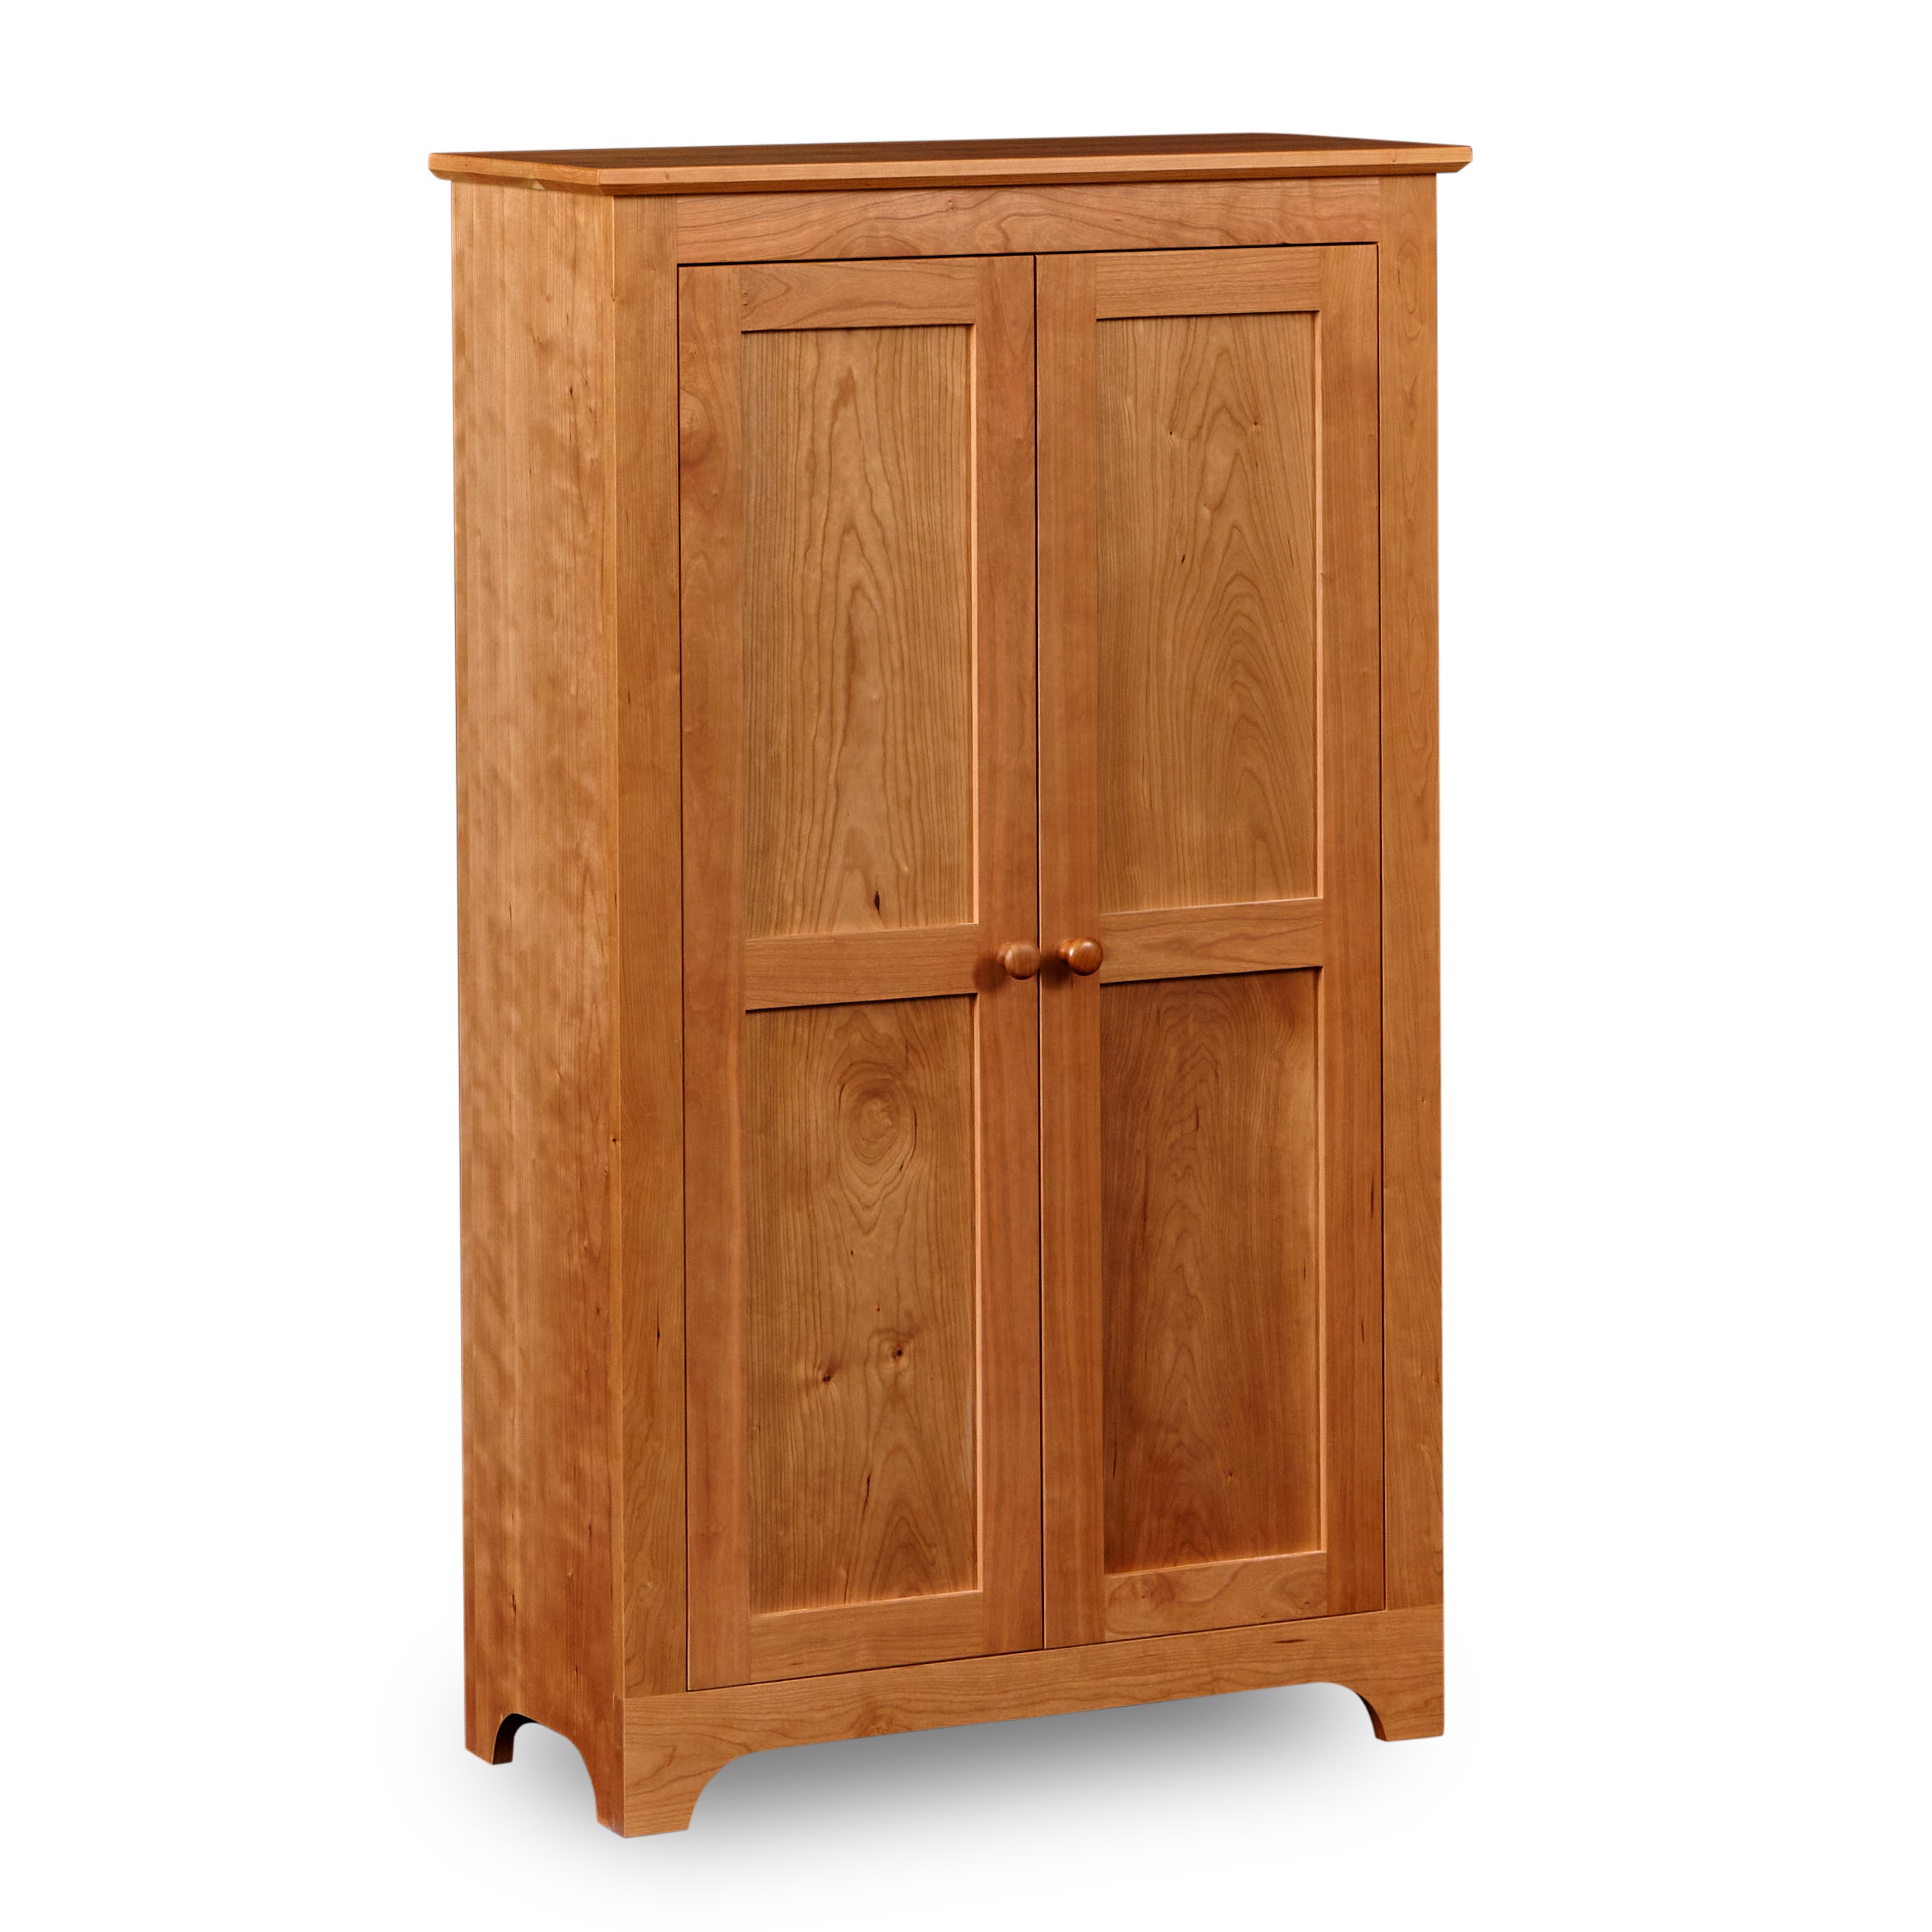 Solid cherry Shaker Jelly Cabinet with two doors, from Maine's Chilton Furniture